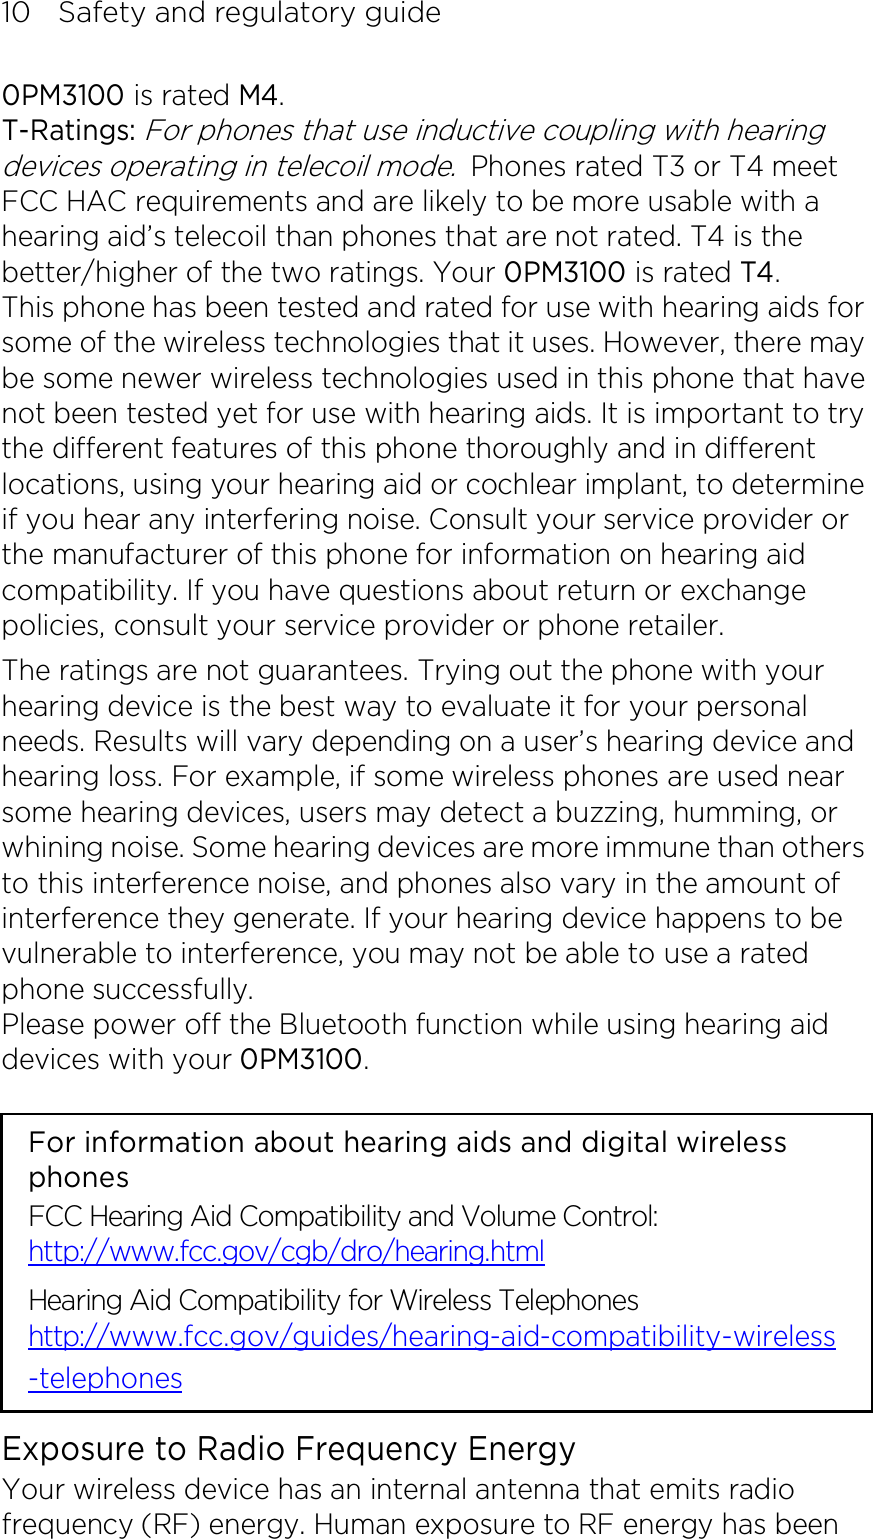 10    Safety and regulatory guide 0PM3100 is rated M4. T-Ratings: For phones that use inductive coupling with hearing devices operating in telecoil mode. Phones rated T3 or T4 meet FCC HAC requirements and are likely to be more usable with a hearing aid’s telecoil than phones that are not rated. T4 is the better/higher of the two ratings. Your 0PM3100 is rated T4. This phone has been tested and rated for use with hearing aids for some of the wireless technologies that it uses. However, there may be some newer wireless technologies used in this phone that have not been tested yet for use with hearing aids. It is important to try the different features of this phone thoroughly and in different locations, using your hearing aid or cochlear implant, to determine if you hear any interfering noise. Consult your service provider or the manufacturer of this phone for information on hearing aid compatibility. If you have questions about return or exchange policies, consult your service provider or phone retailer. The ratings are not guarantees. Trying out the phone with your hearing device is the best way to evaluate it for your personal needs. Results will vary depending on a user’s hearing device and hearing loss. For example, if some wireless phones are used near some hearing devices, users may detect a buzzing, humming, or whining noise. Some hearing devices are more immune than others to this interference noise, and phones also vary in the amount of interference they generate. If your hearing device happens to be vulnerable to interference, you may not be able to use a rated phone successfully. Please power off the Bluetooth function while using hearing aid devices with your 0PM3100.                                                                      For information about hearing aids and digital wireless phones FCC Hearing Aid Compatibility and Volume Control: http://www.fcc.gov/cgb/dro/hearing.html Hearing Aid Compatibility for Wireless Telephones http://www.fcc.gov/guides/hearing-aid-compatibility-wireless-telephones Exposure to Radio Frequency Energy Your wireless device has an internal antenna that emits radio frequency (RF) energy. Human exposure to RF energy has been 